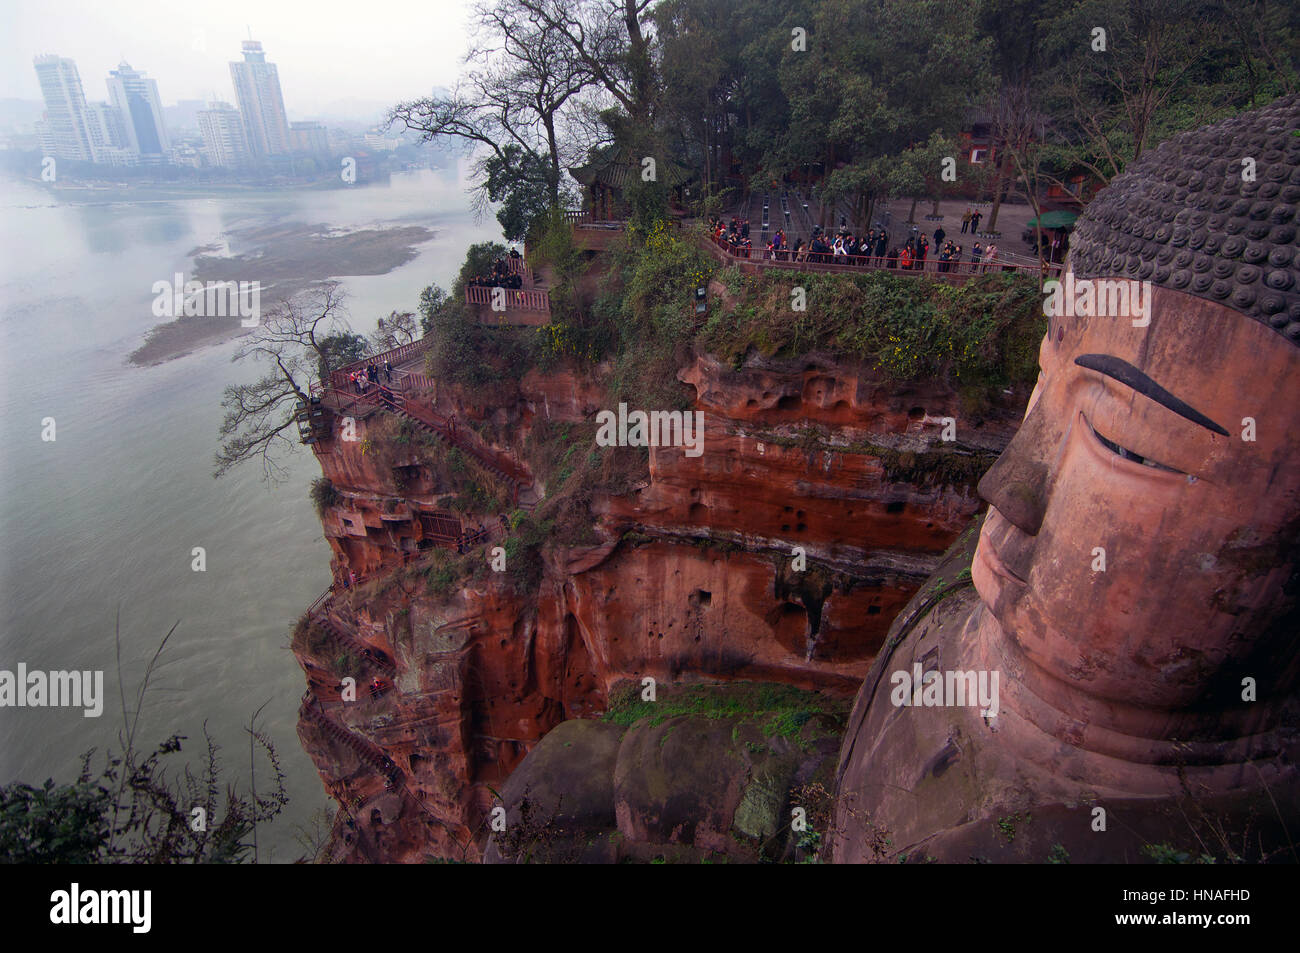 Dafo, the Giant Buddha carved into a cliff, Leshan, China Stock Photo